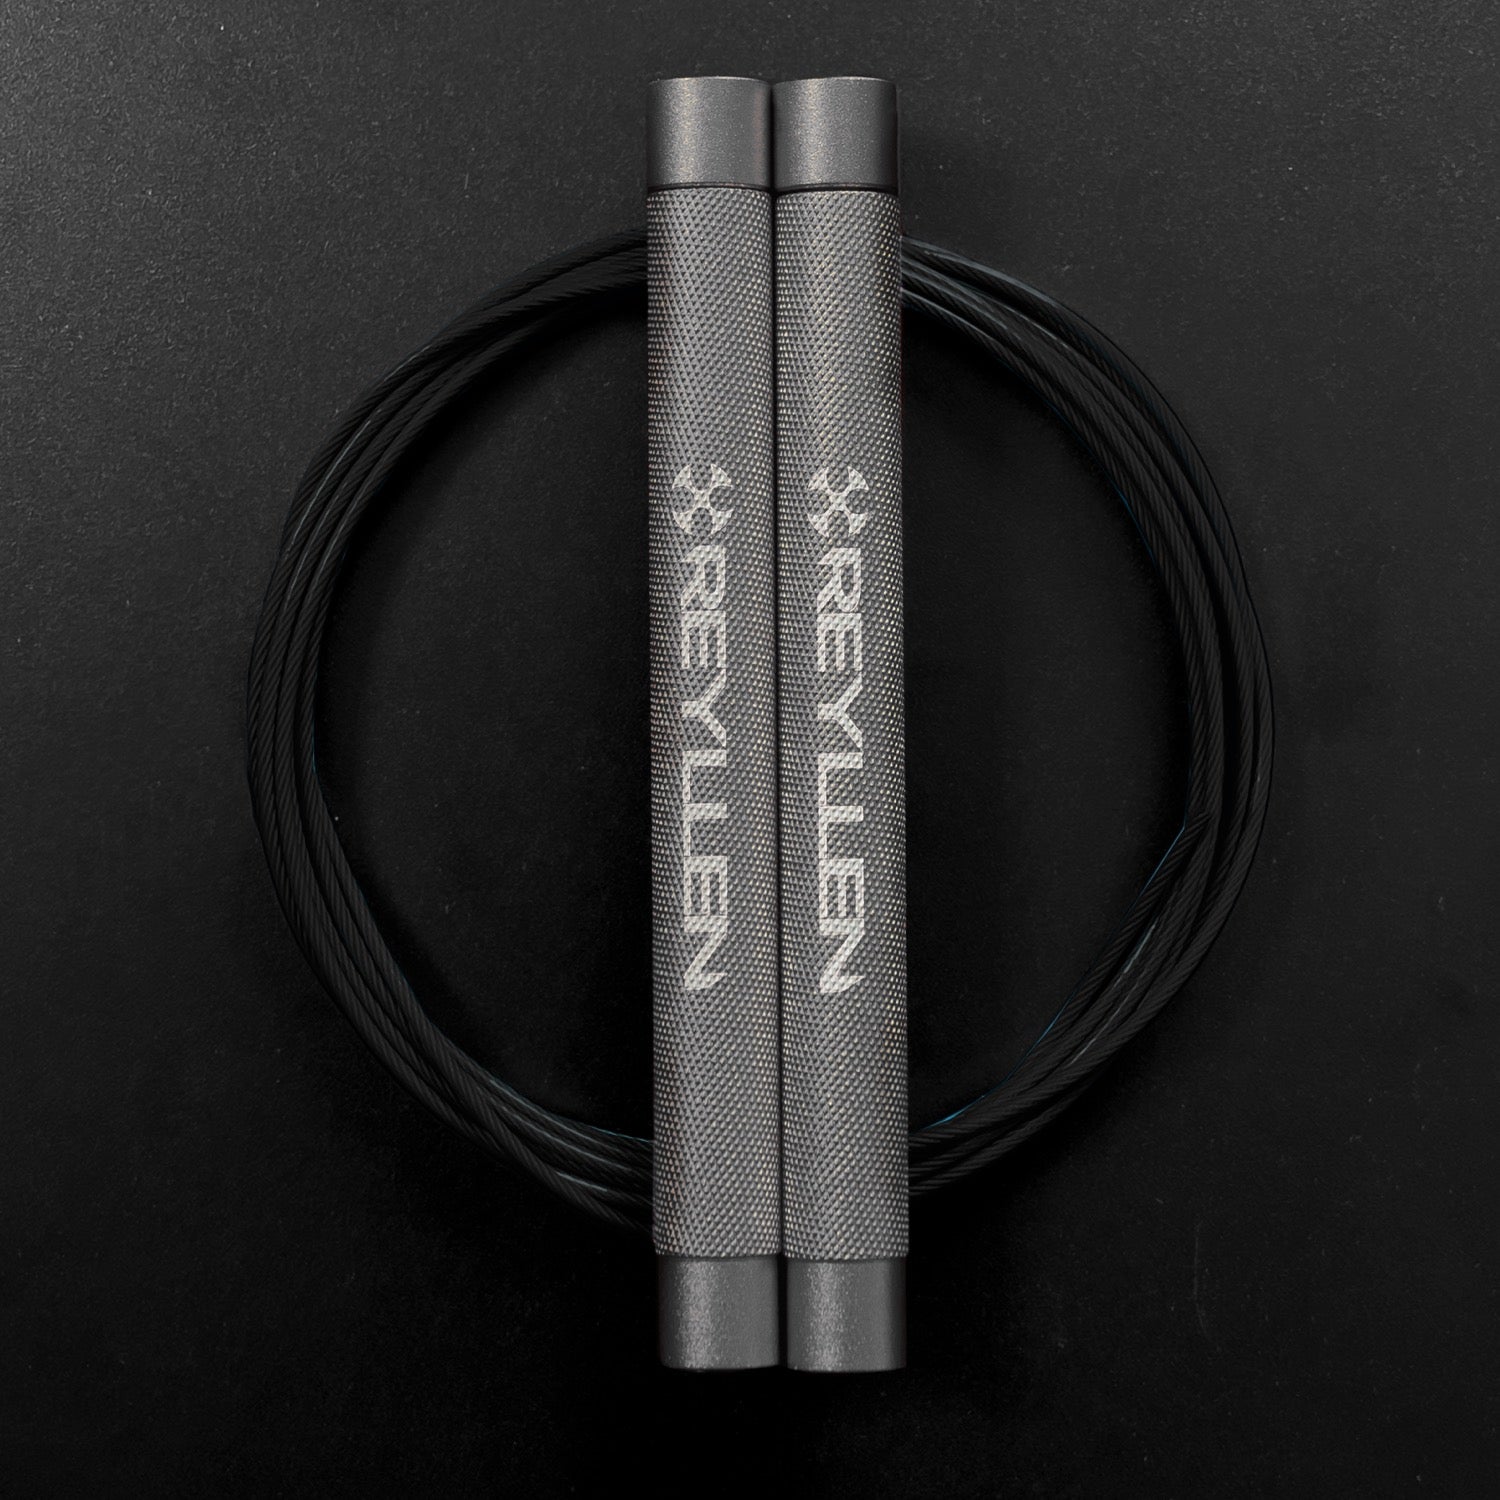 Reyllen Flare Mx Speed Skipping Jump Rope - Aluminium Handles - silver with black nylon coated cable